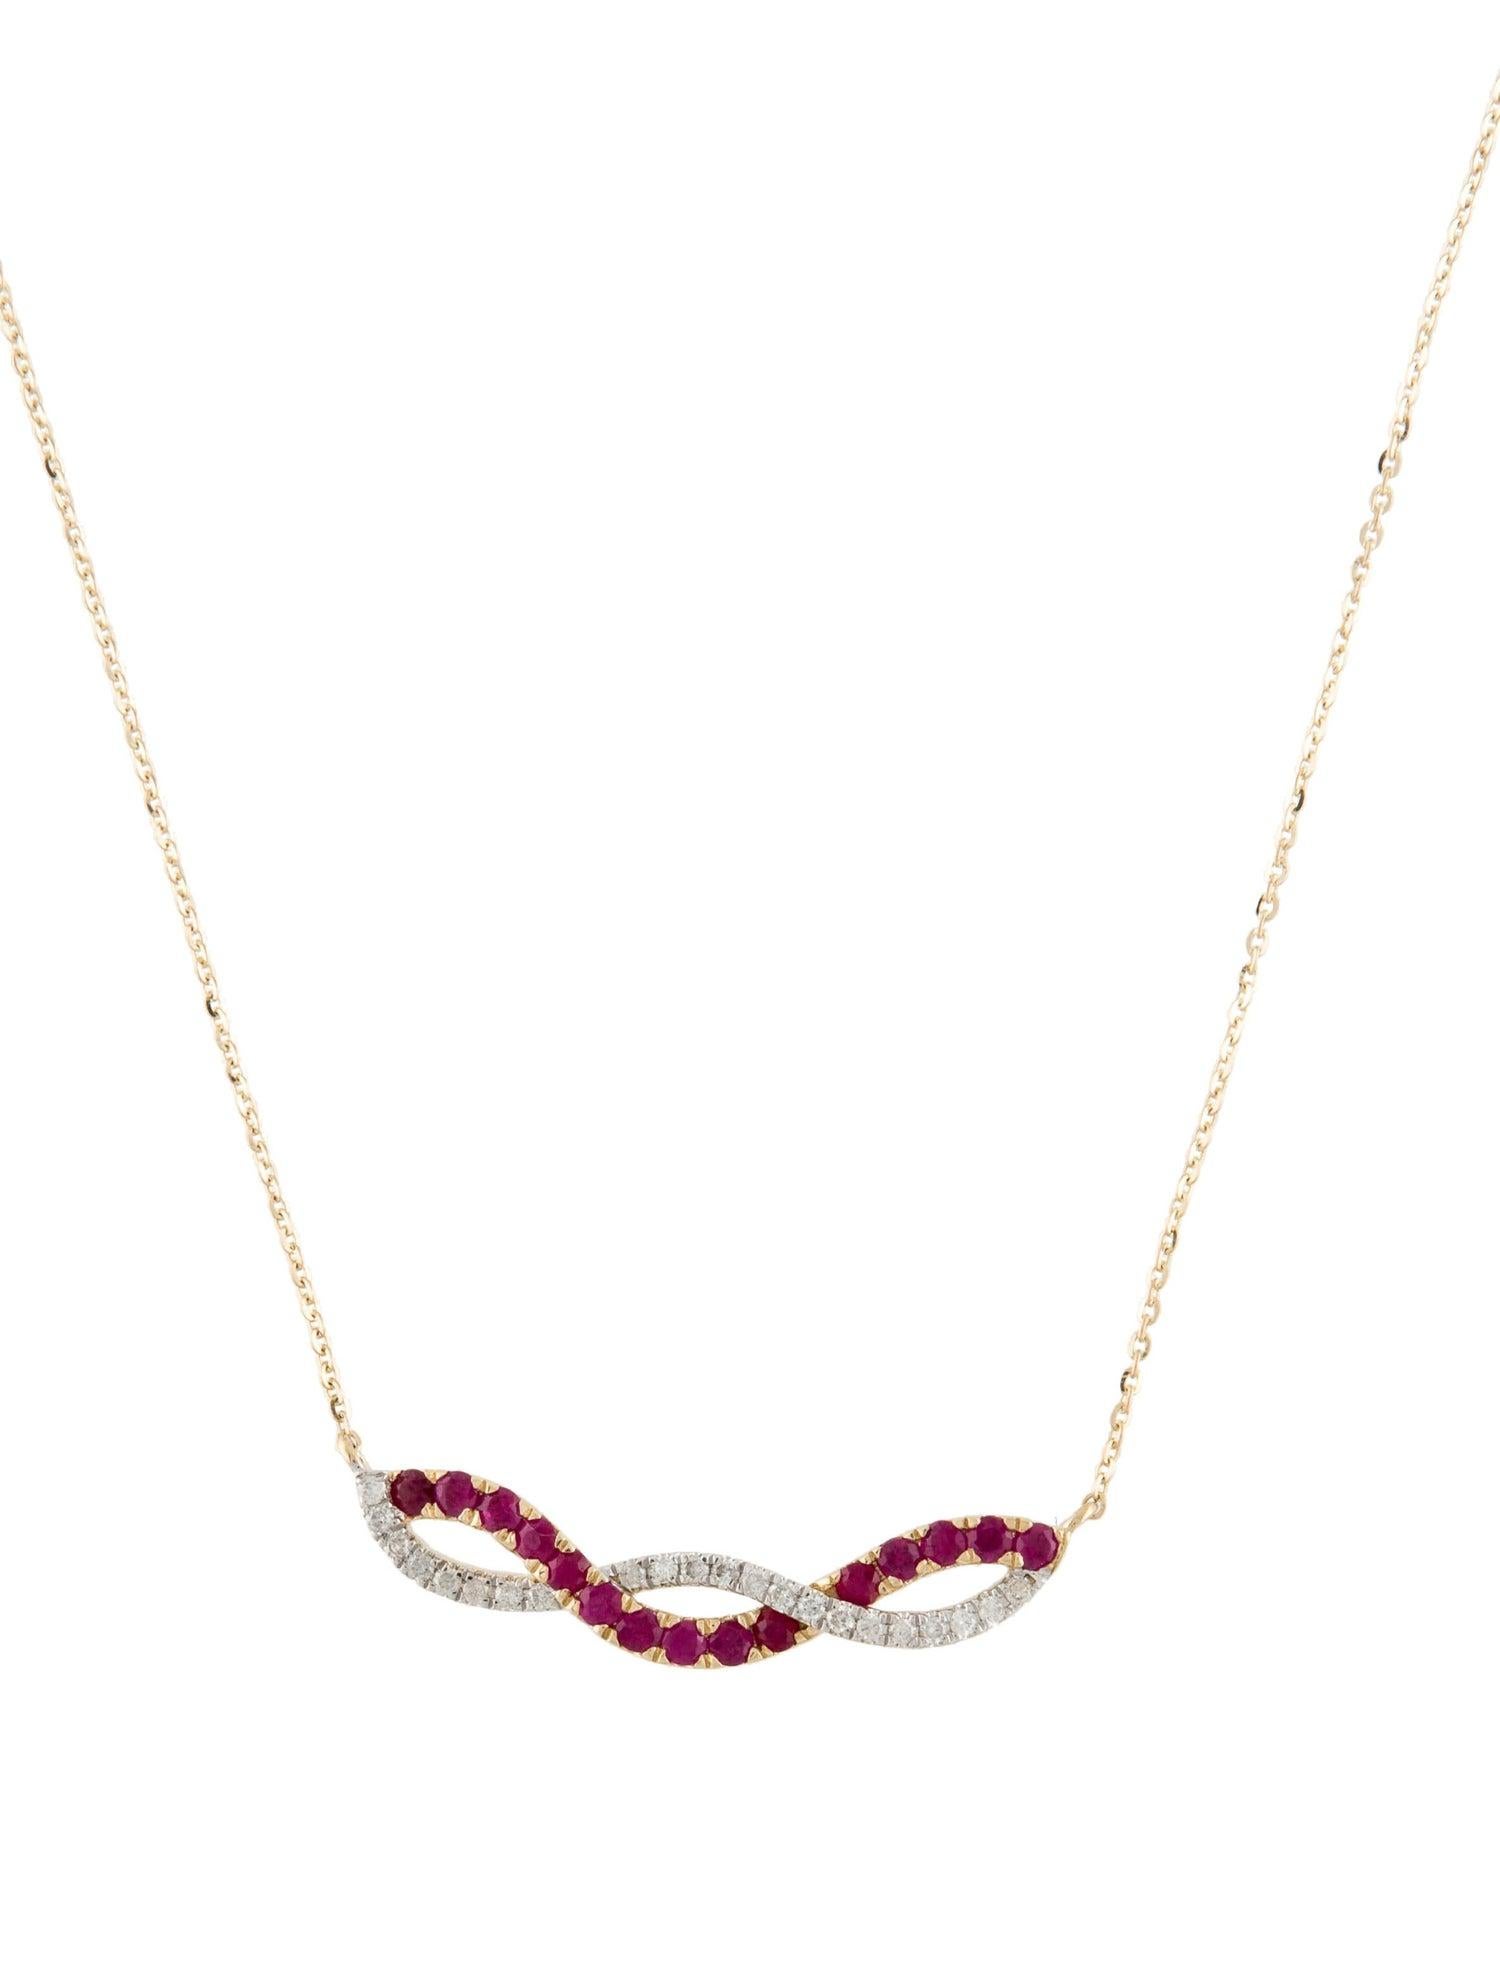 Luxury 14K Ruby & Diamond Pendant Necklace - Elegant Gemstone, Statement Jewelry In New Condition For Sale In Holtsville, NY